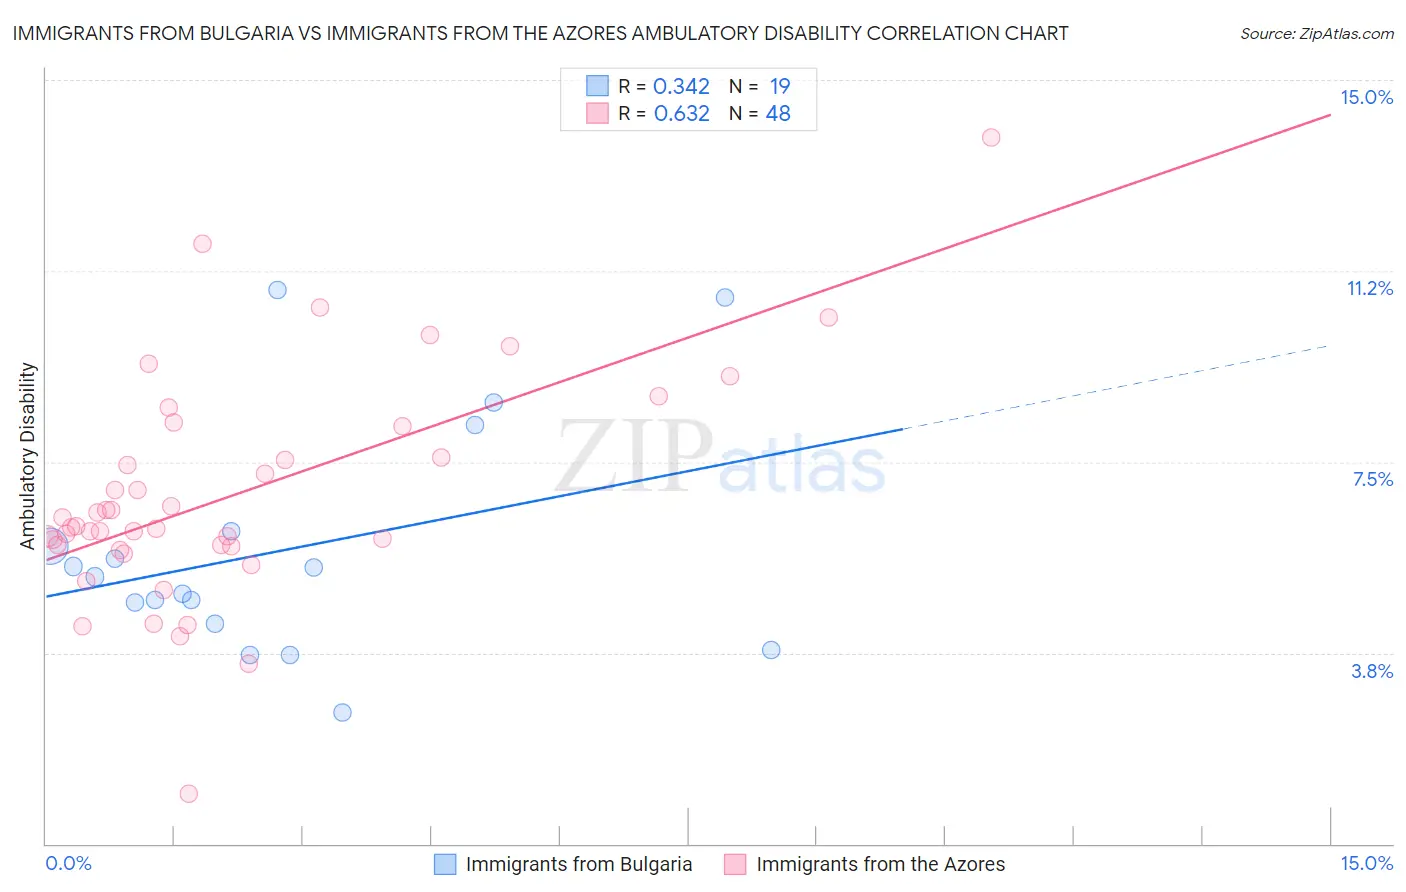 Immigrants from Bulgaria vs Immigrants from the Azores Ambulatory Disability